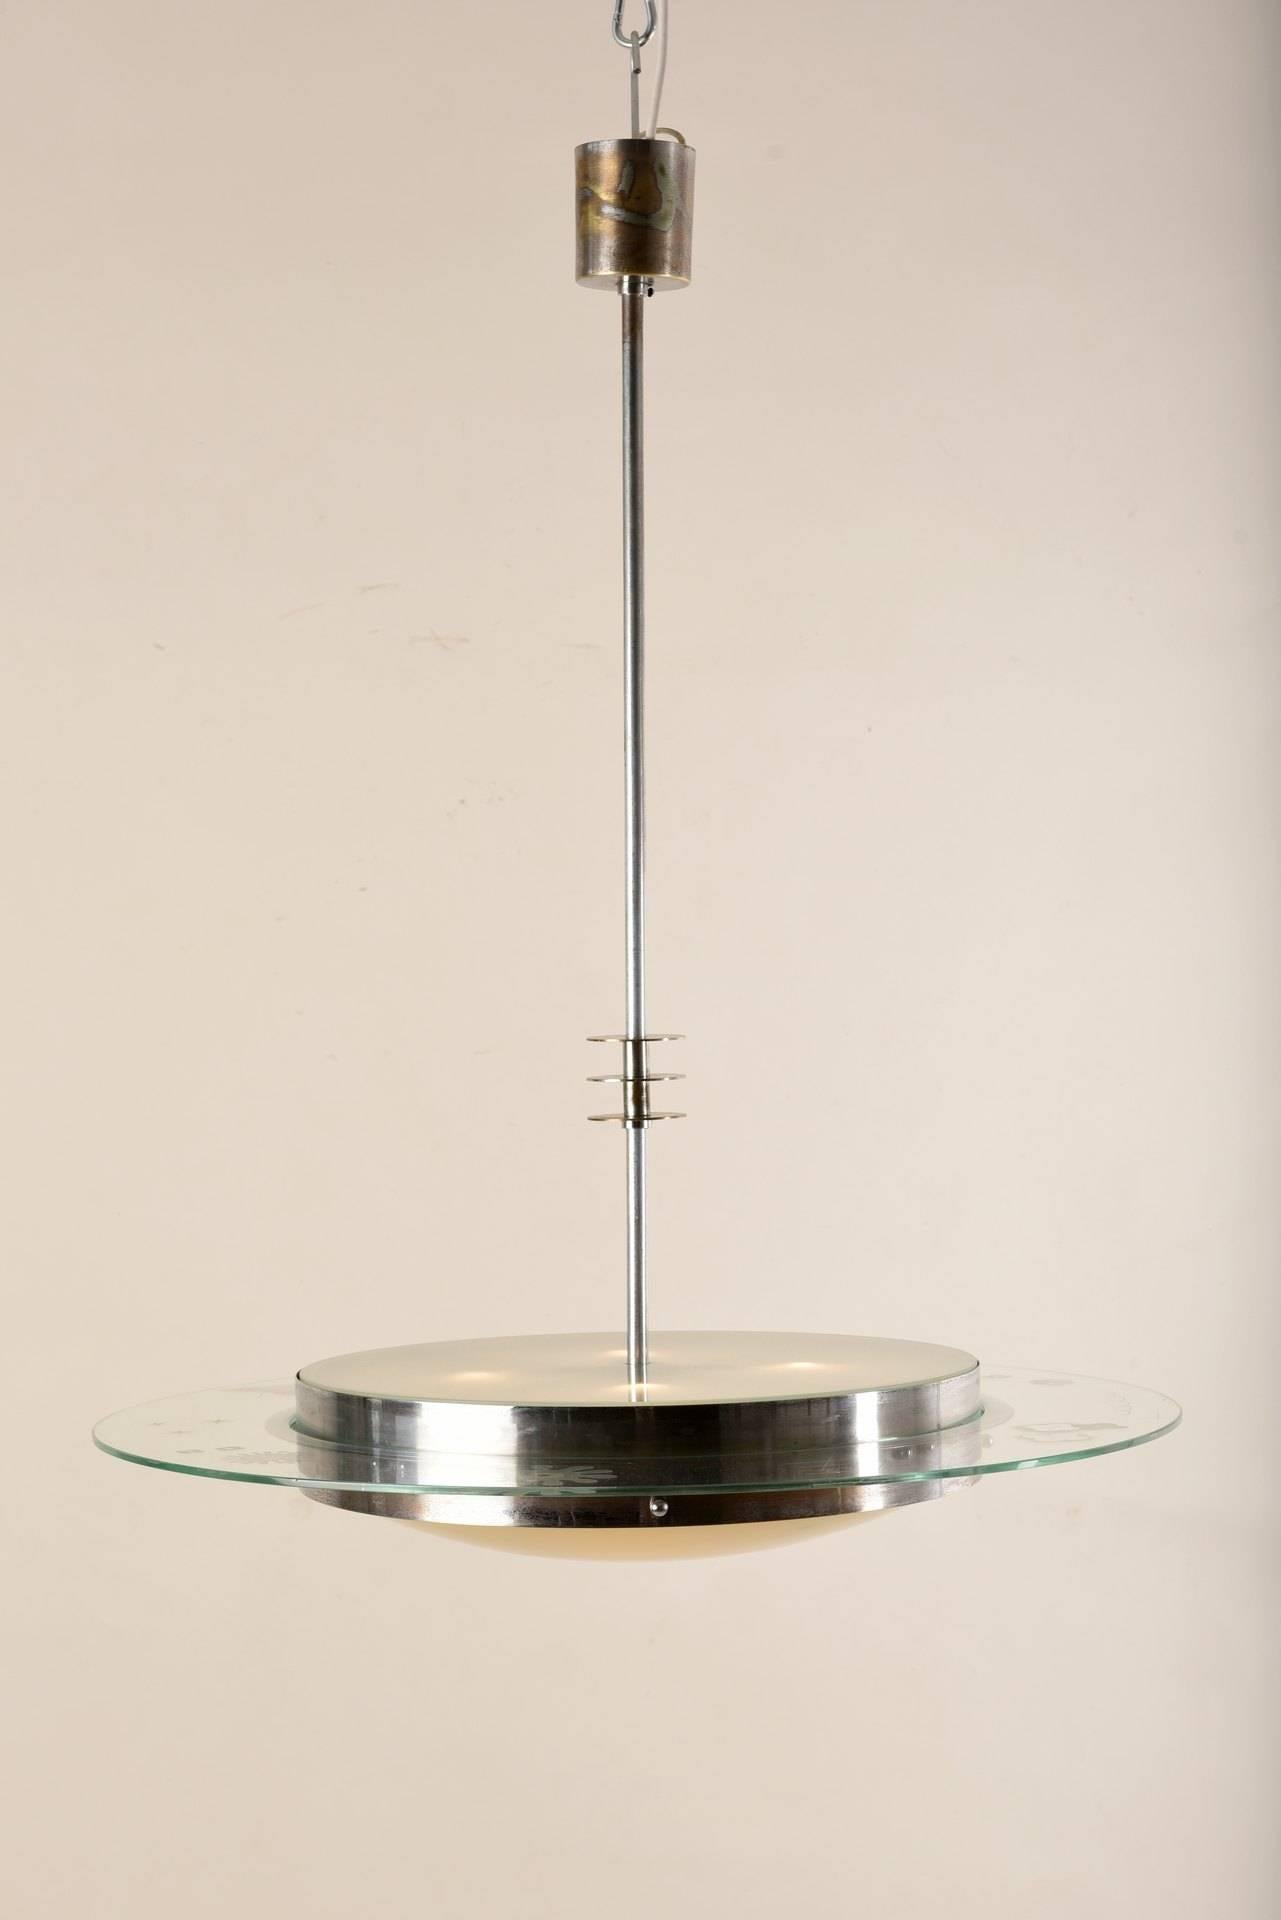 Pietro Chiesa Lamp by Fontana Arte, Italy, 1930s For Sale 2